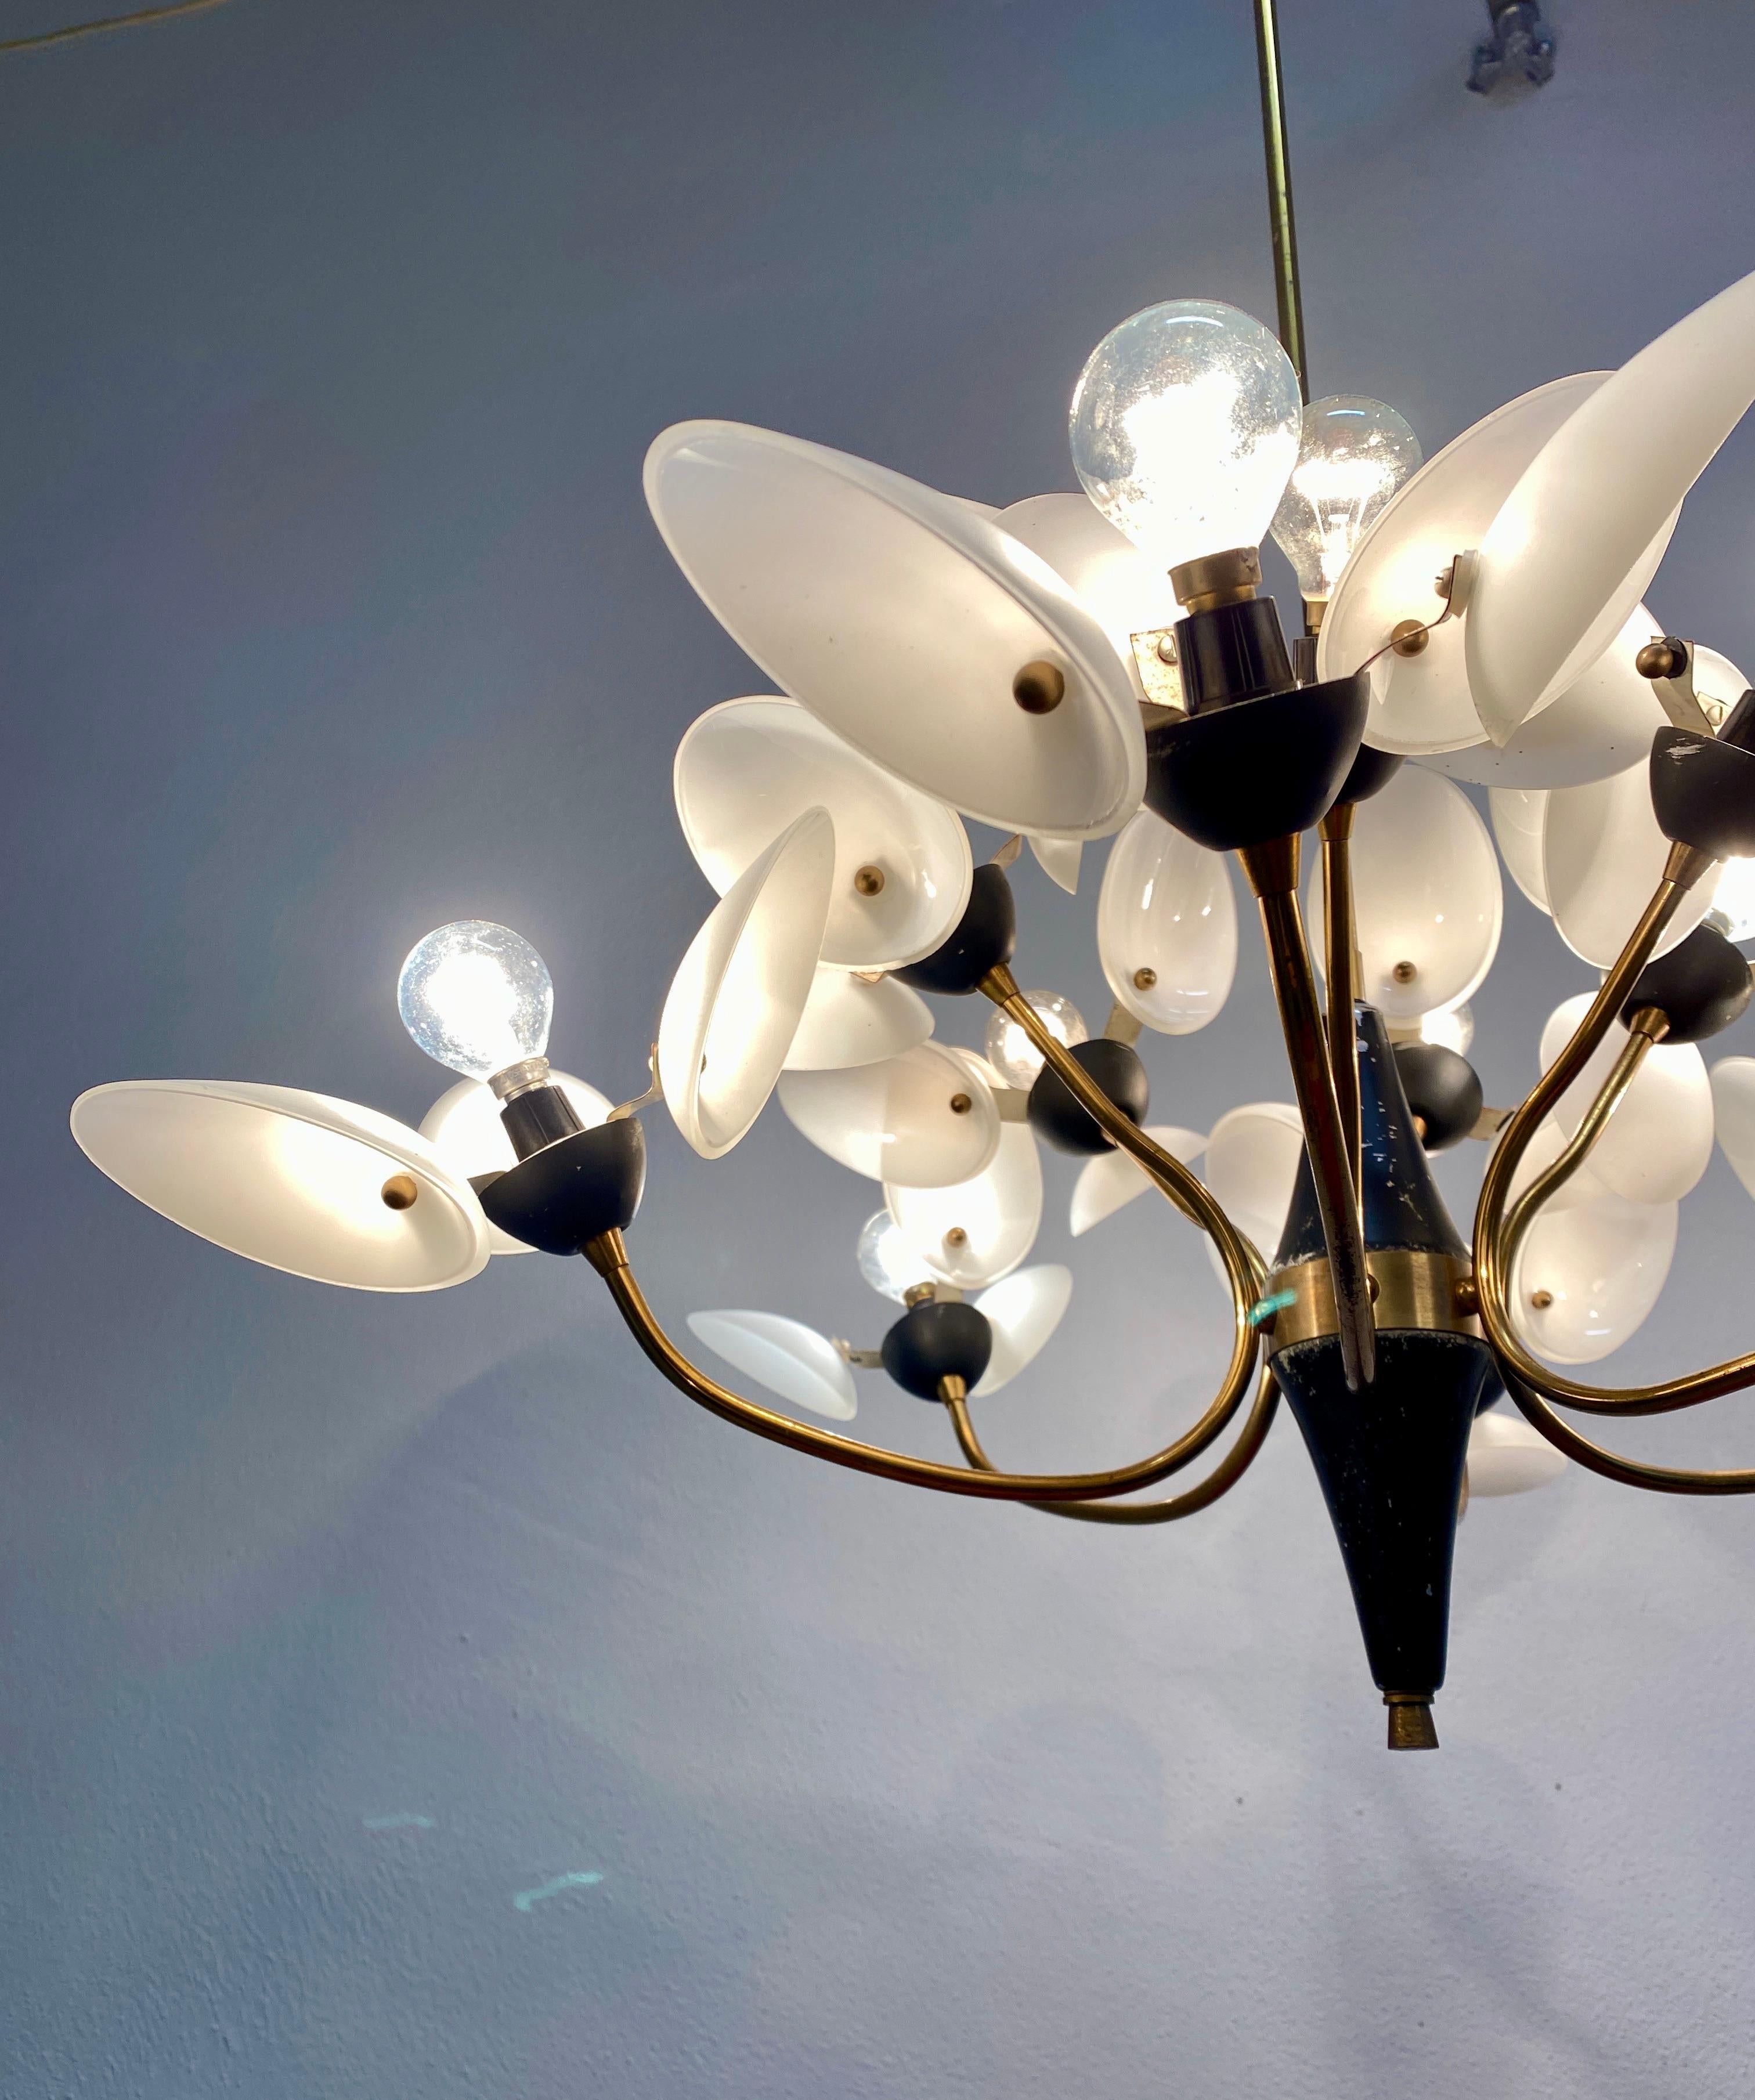 Mid-20th Century Original Stilnovo Chandelier from Satinized Glass and Brass, Italy, circa 1950 For Sale